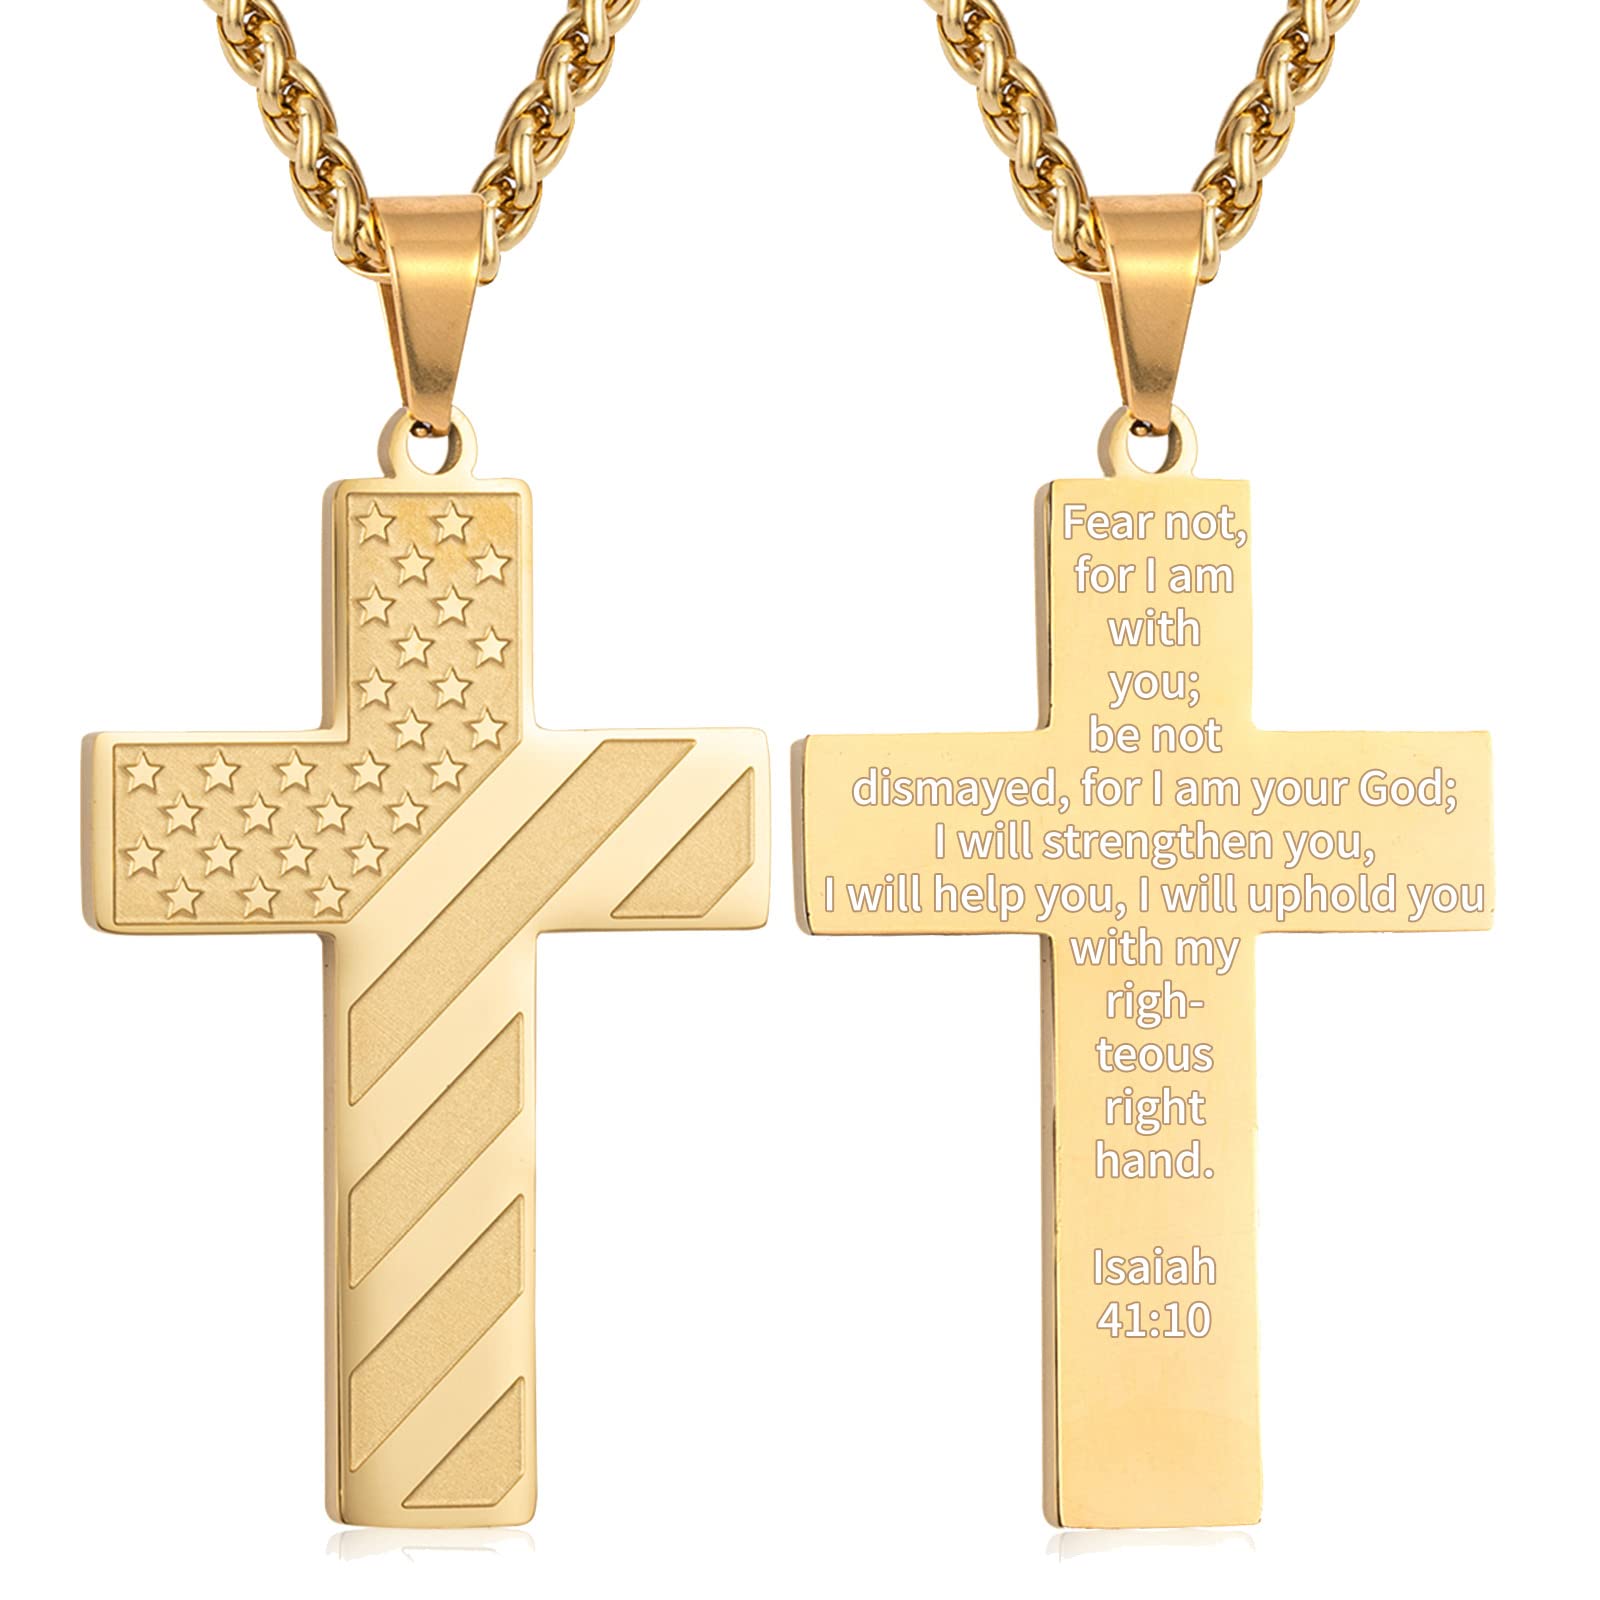 DuoDiner Gold Cross Necklace for Boys Men Pendant Chain Stainless Steel American Flag Isaiah 41:10 Bible Verse Religious Jewelry